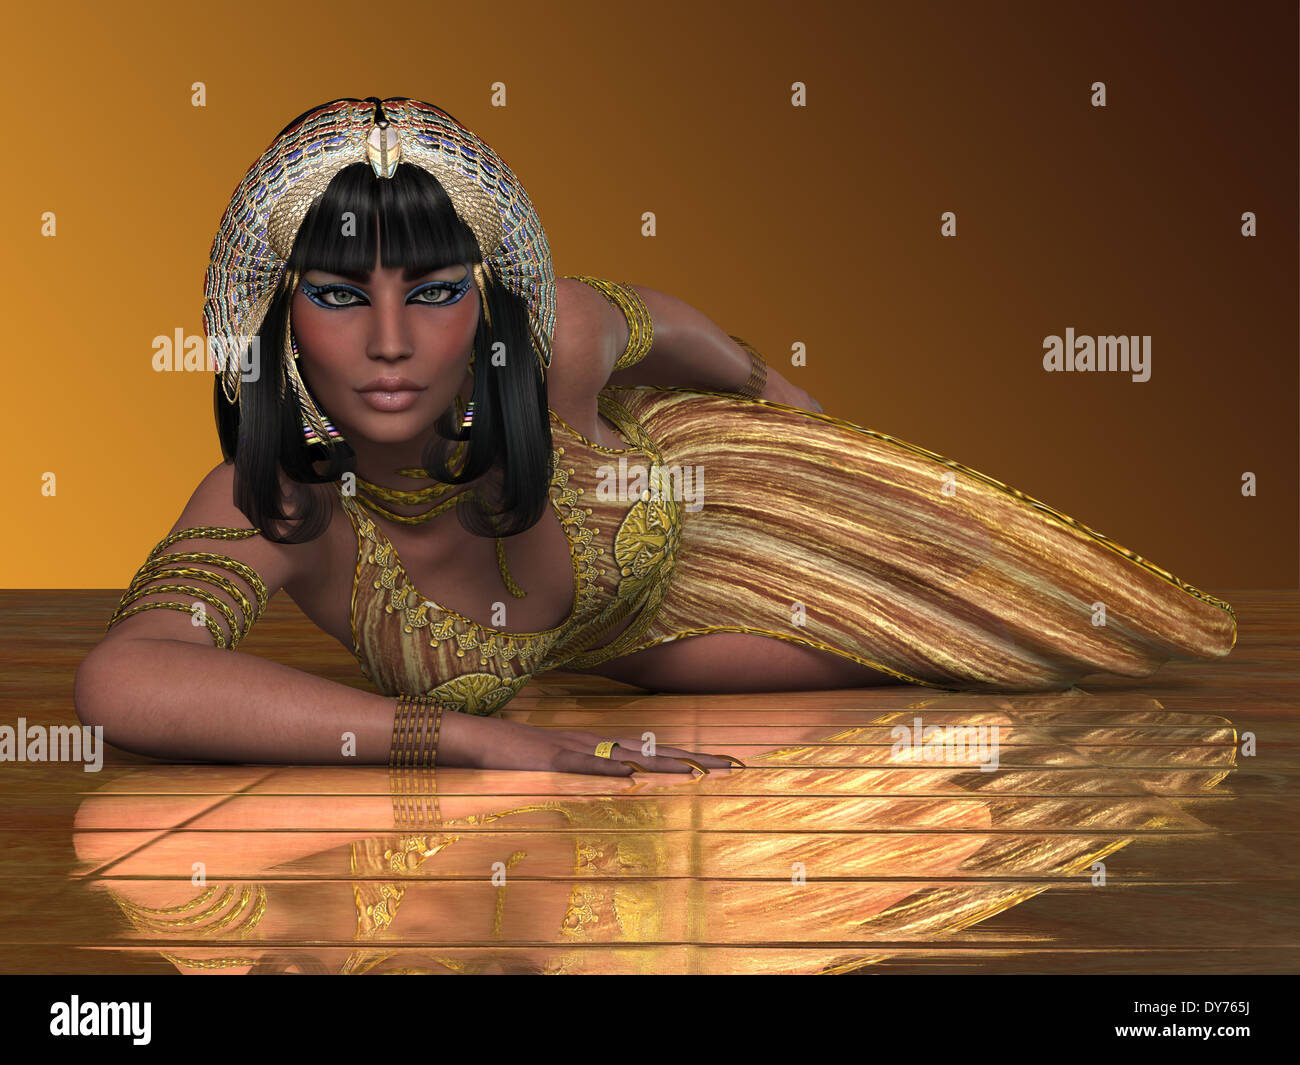 An Egyptian lady with traditional clothing from the Old Kingdom of Egypt. Stock Photo